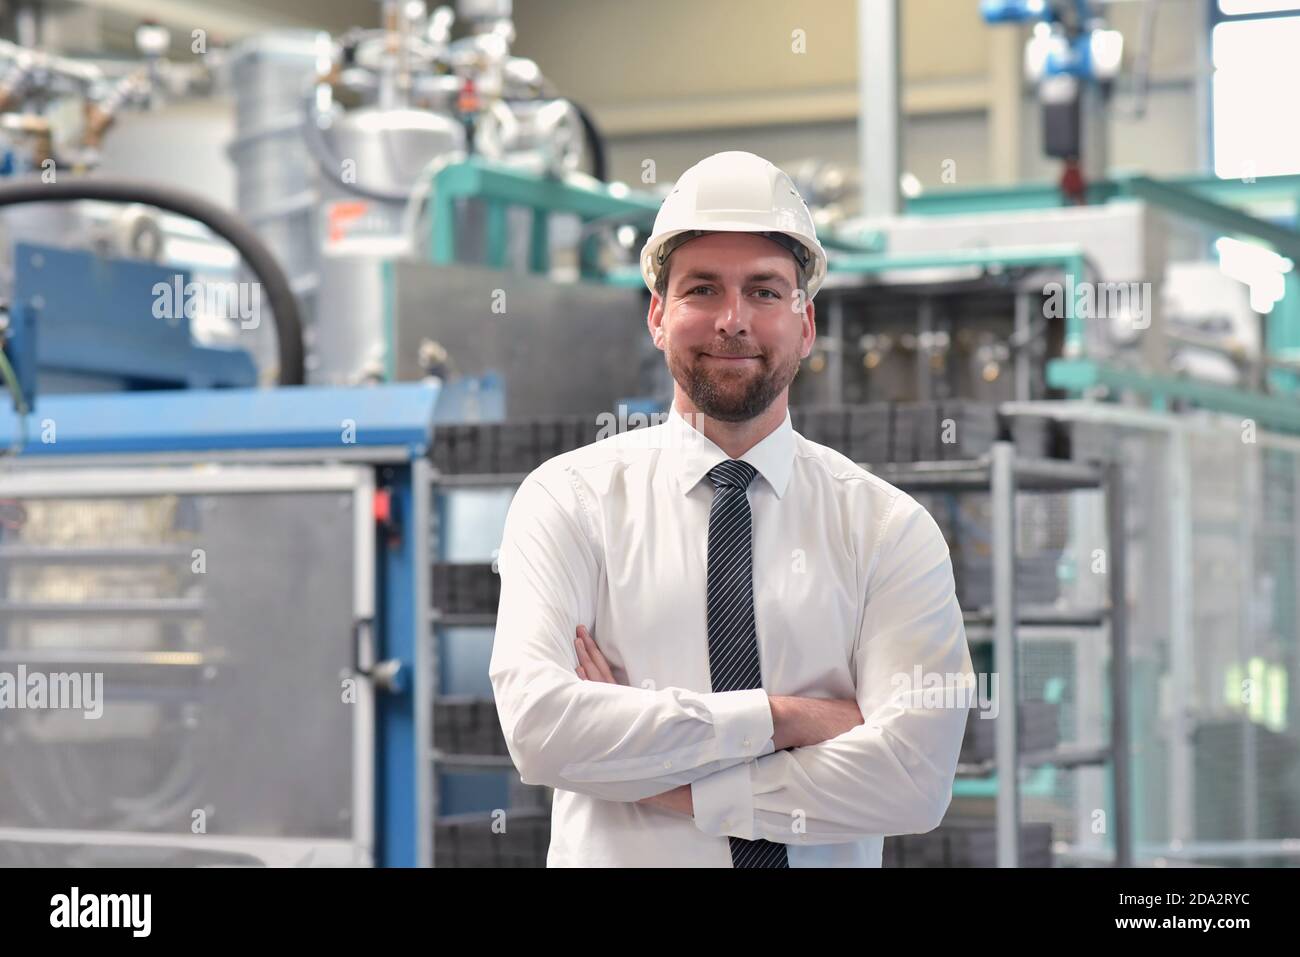 portrait of a successful smiling businessman/ engineer on site in an industrial factory with helmet Stock Photo